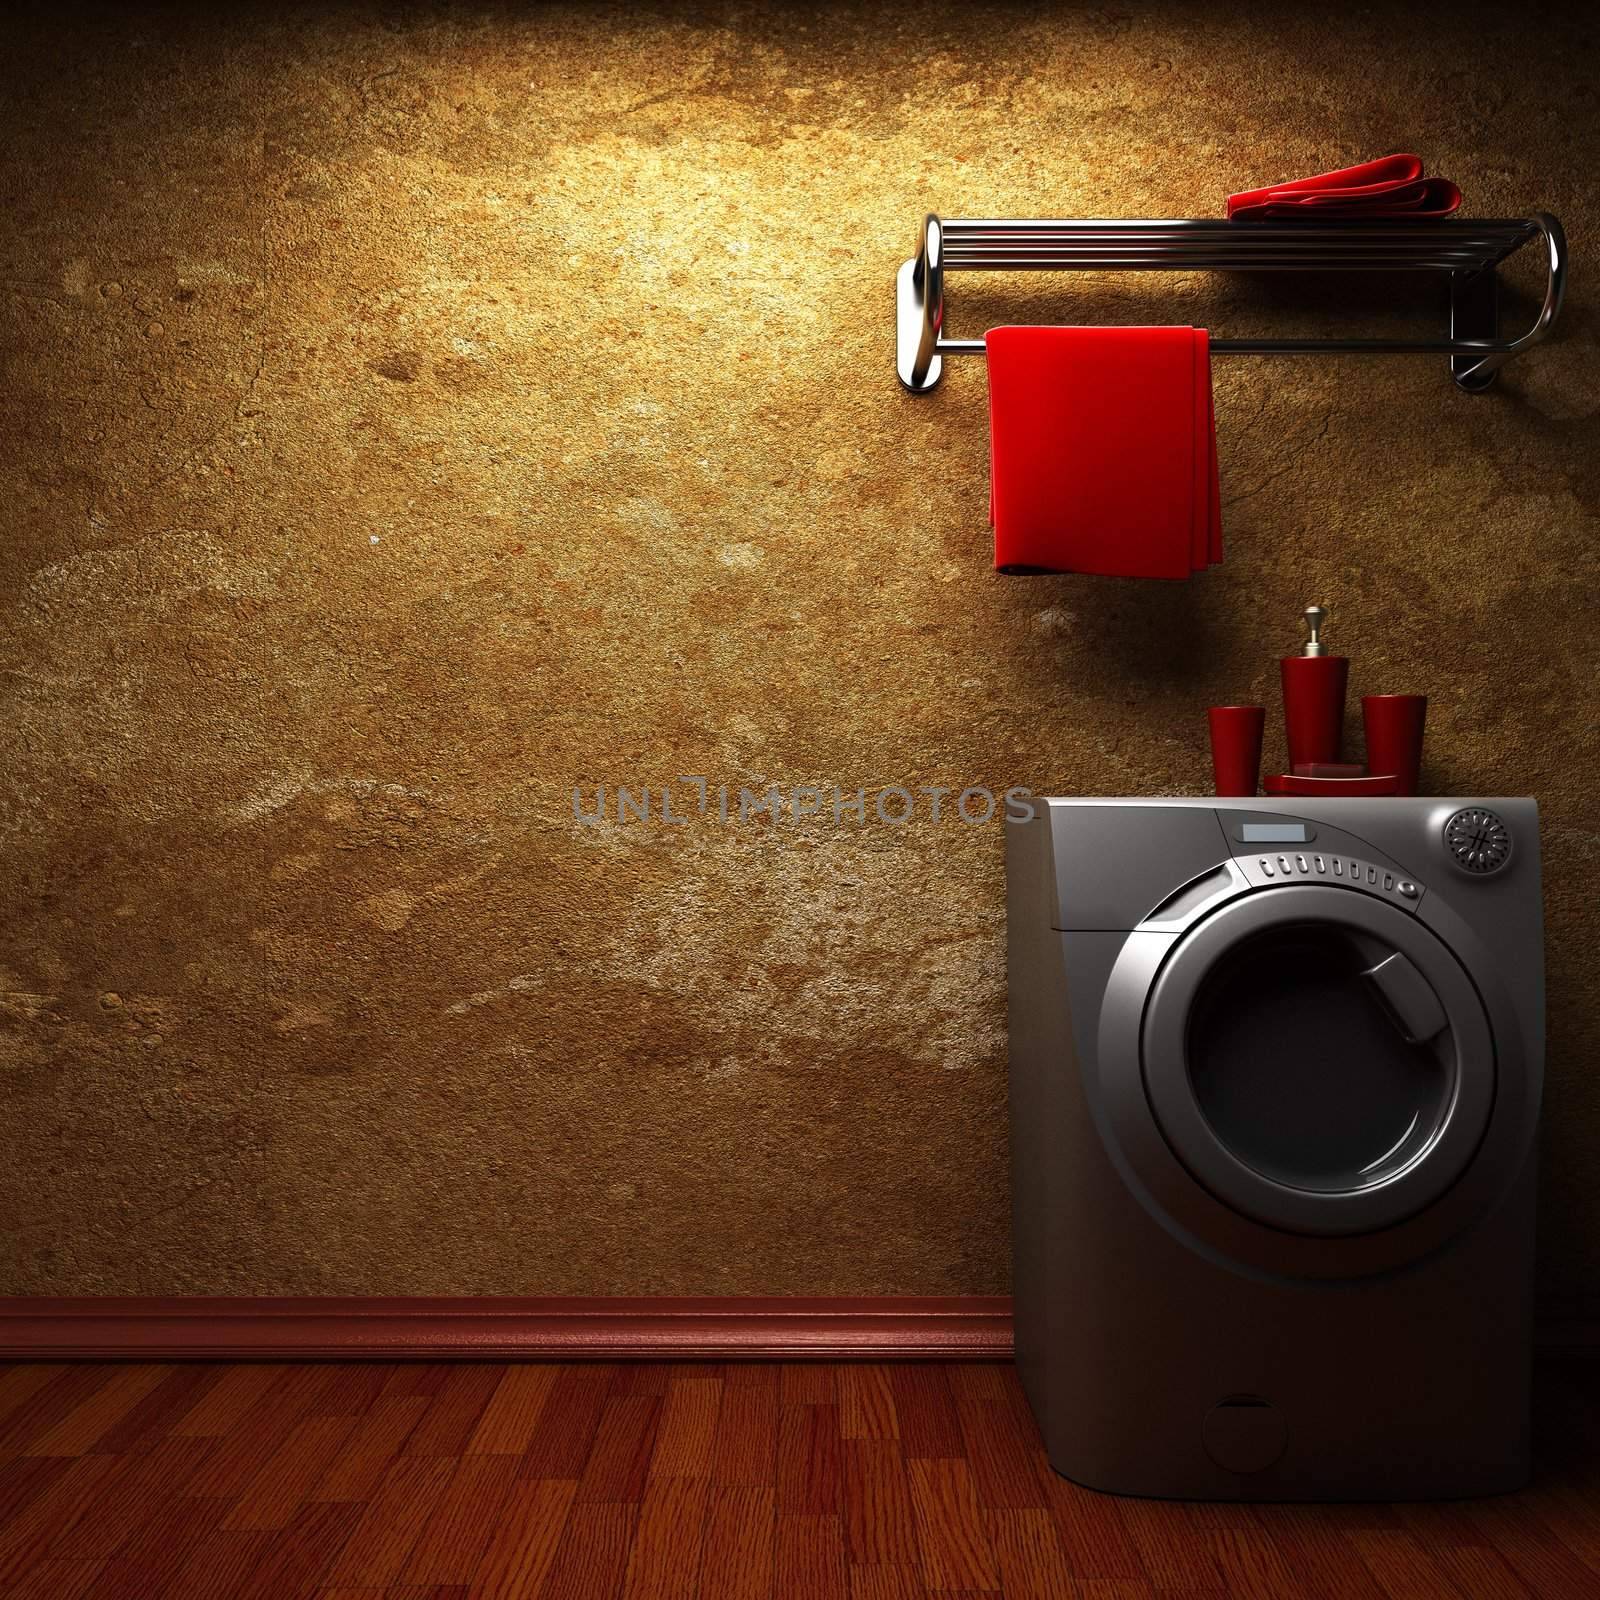 washing machine by icetray